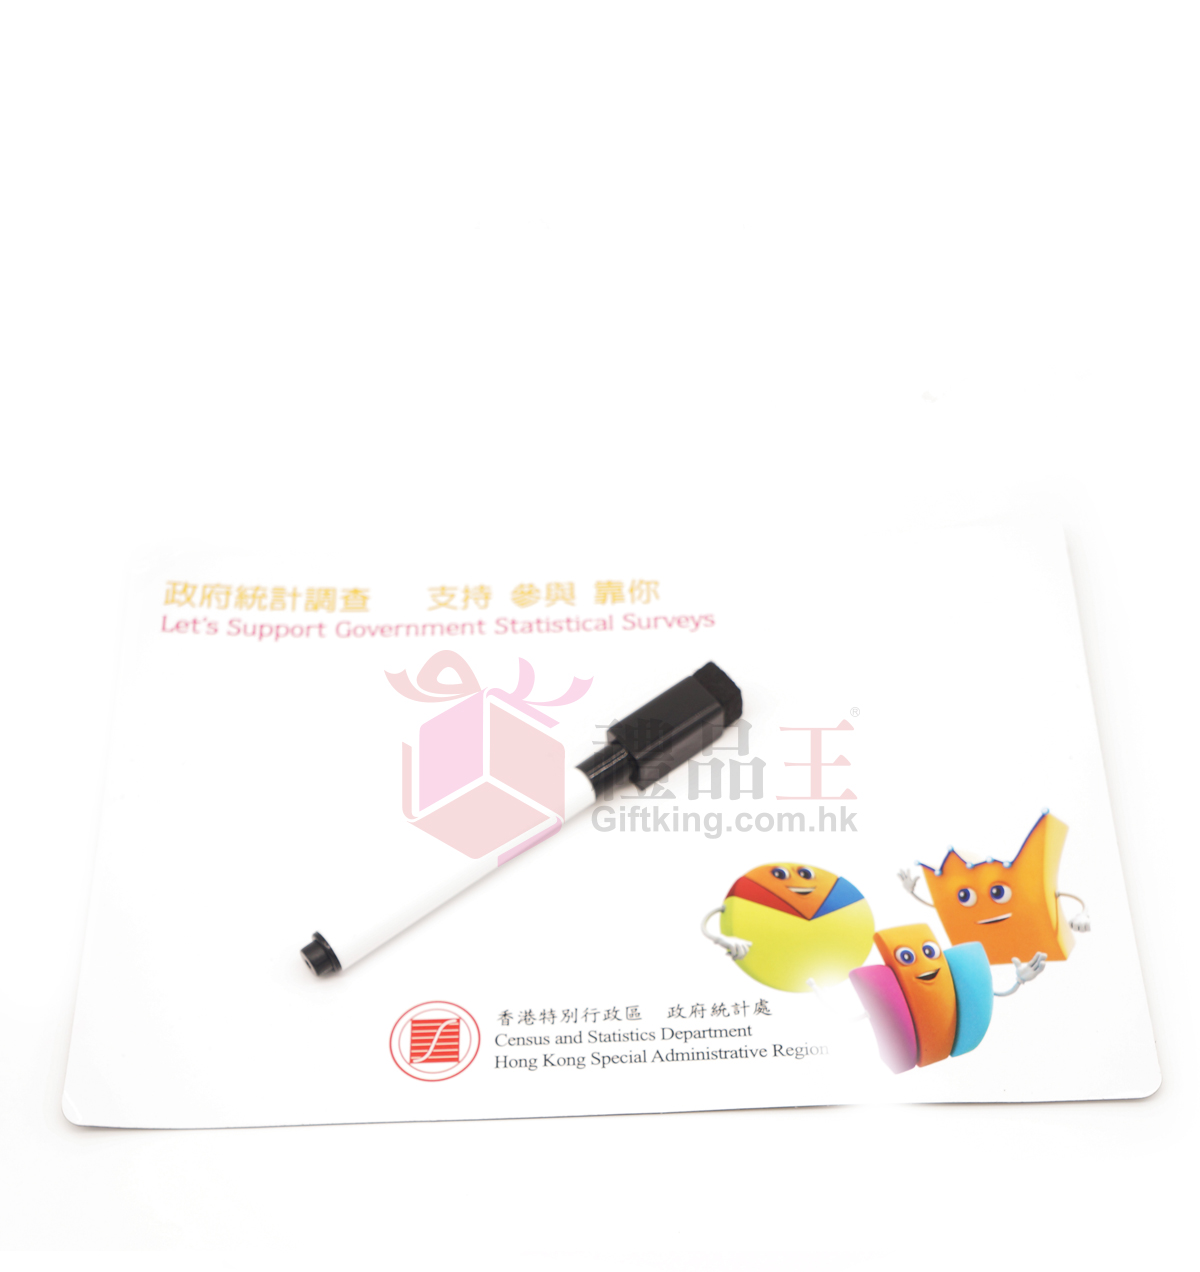 Census and Statistics Department Magnetic Whiteboard and Whiteboard Marker (Stationery Gift)